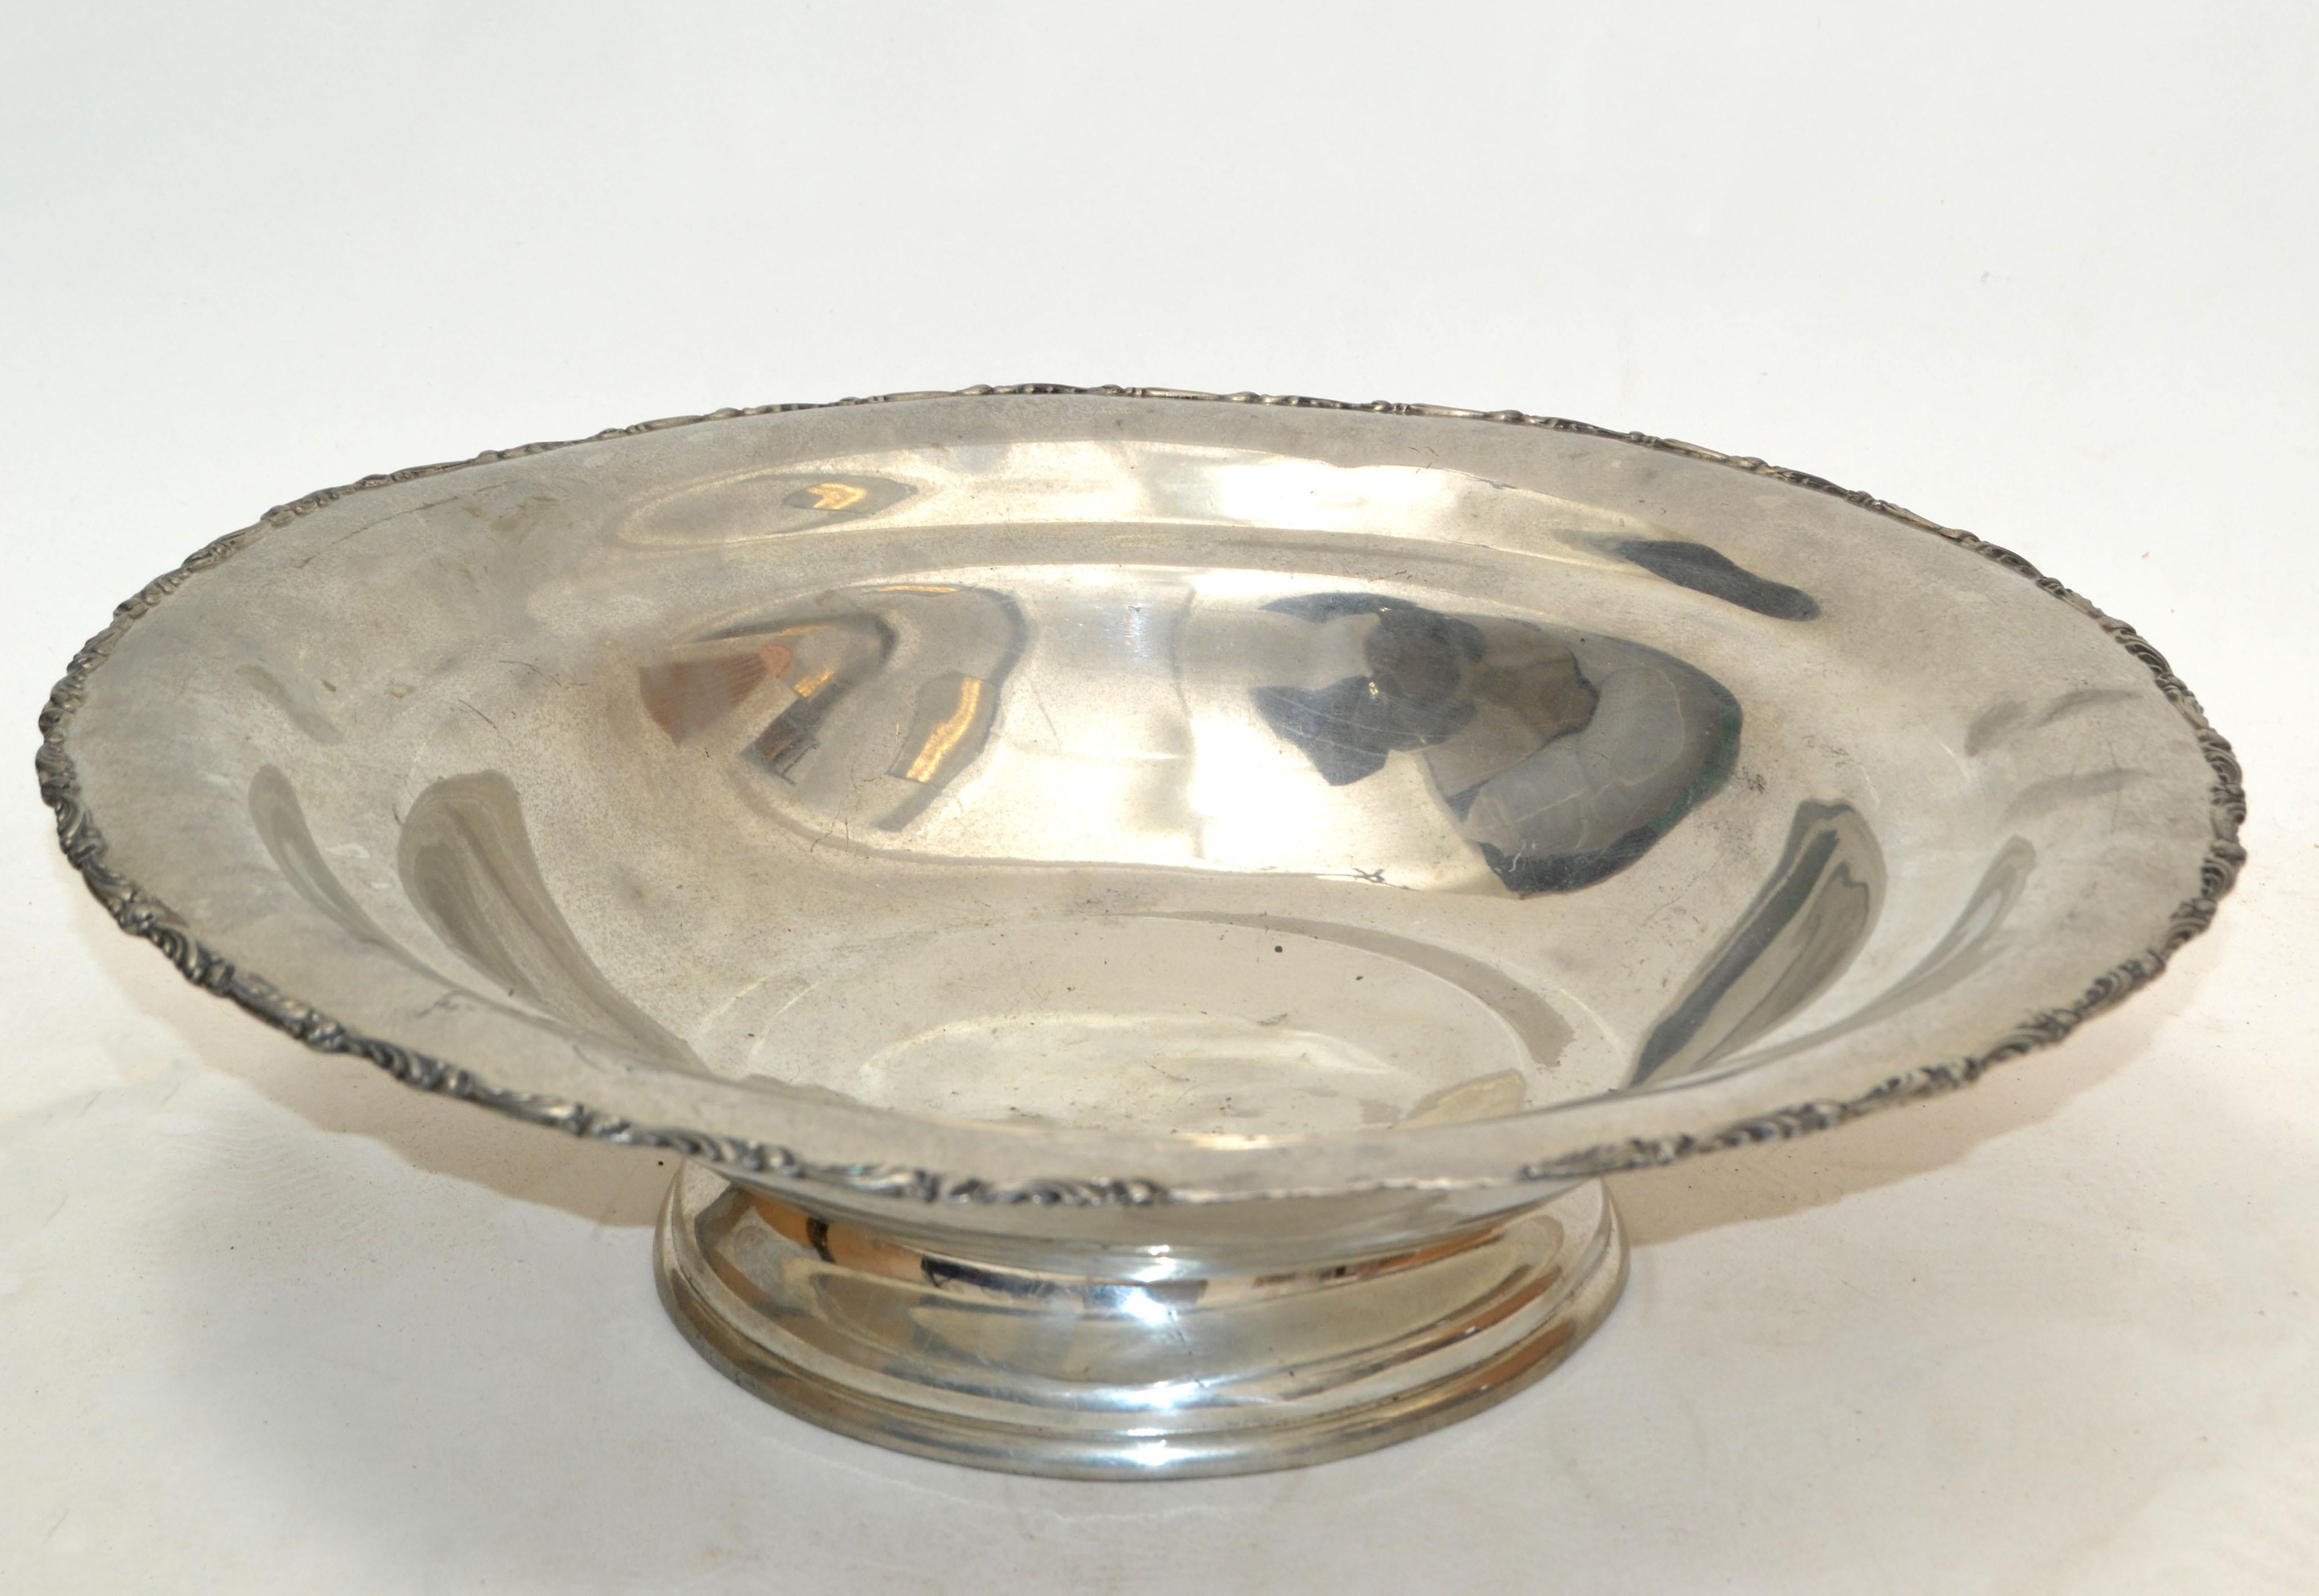 Vintage English silver round serving bowl with ornate flowers on pedestal.
It is in original vintage condition and has some stains and is tarnished.
Marked: English Silver MFG Corp. Quadrupled Silver Plate numbered 332 & Trademark at the Base.